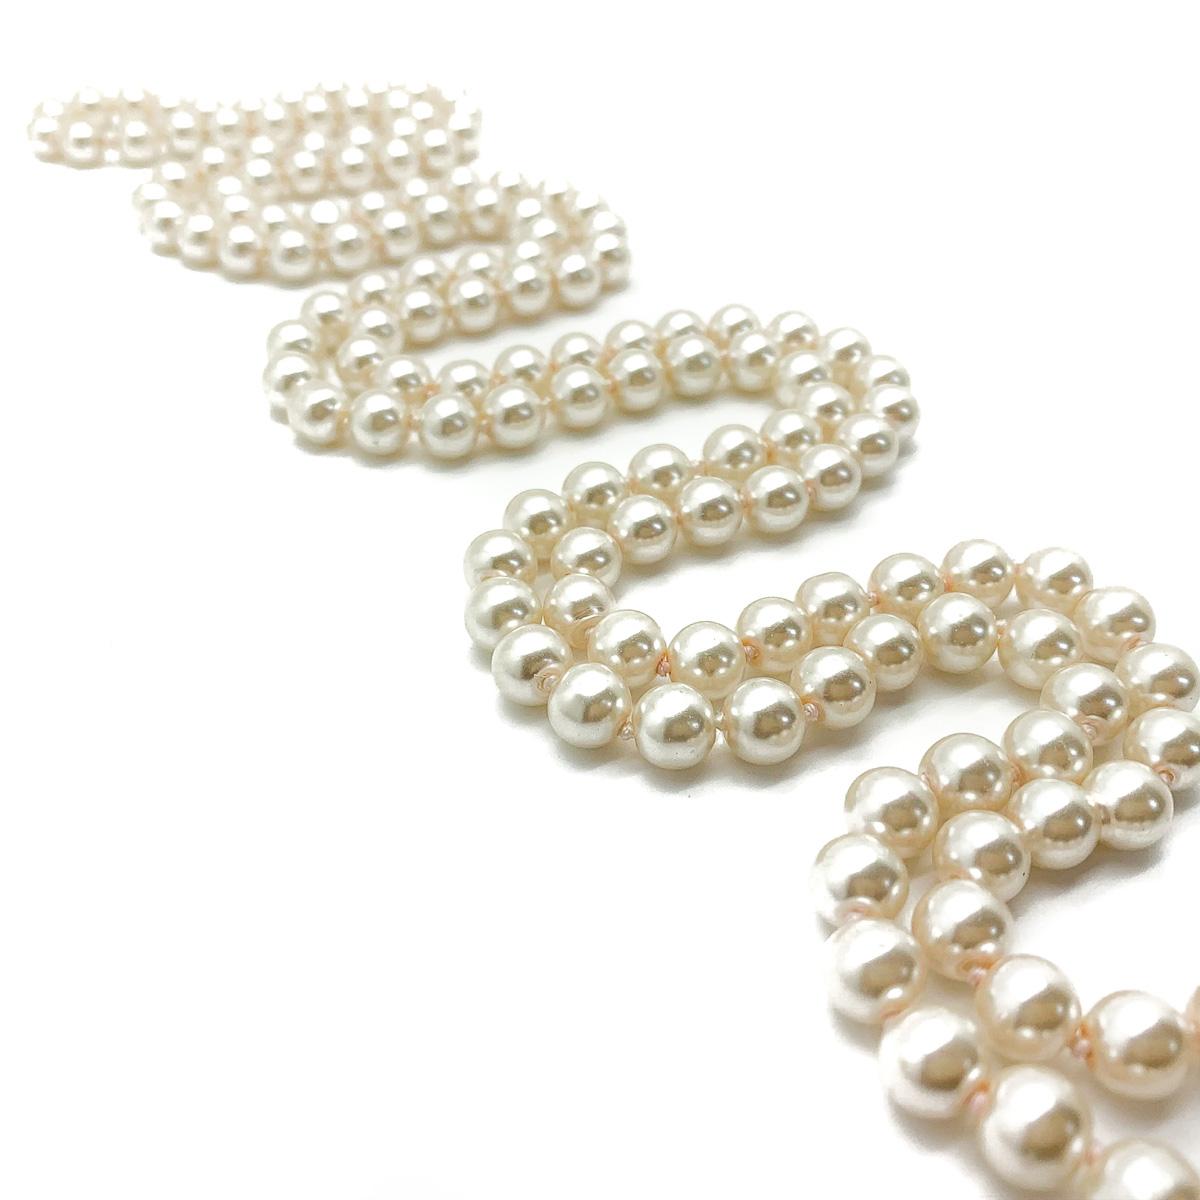 A very long Vintage Pearl rope opera length necklace. Featuring a very long rope of glass faux pearls; non graduated and individually knotted. No clasp. Very good vintage condition, 64cms. A total classic that can be dialled up or down for an edgy